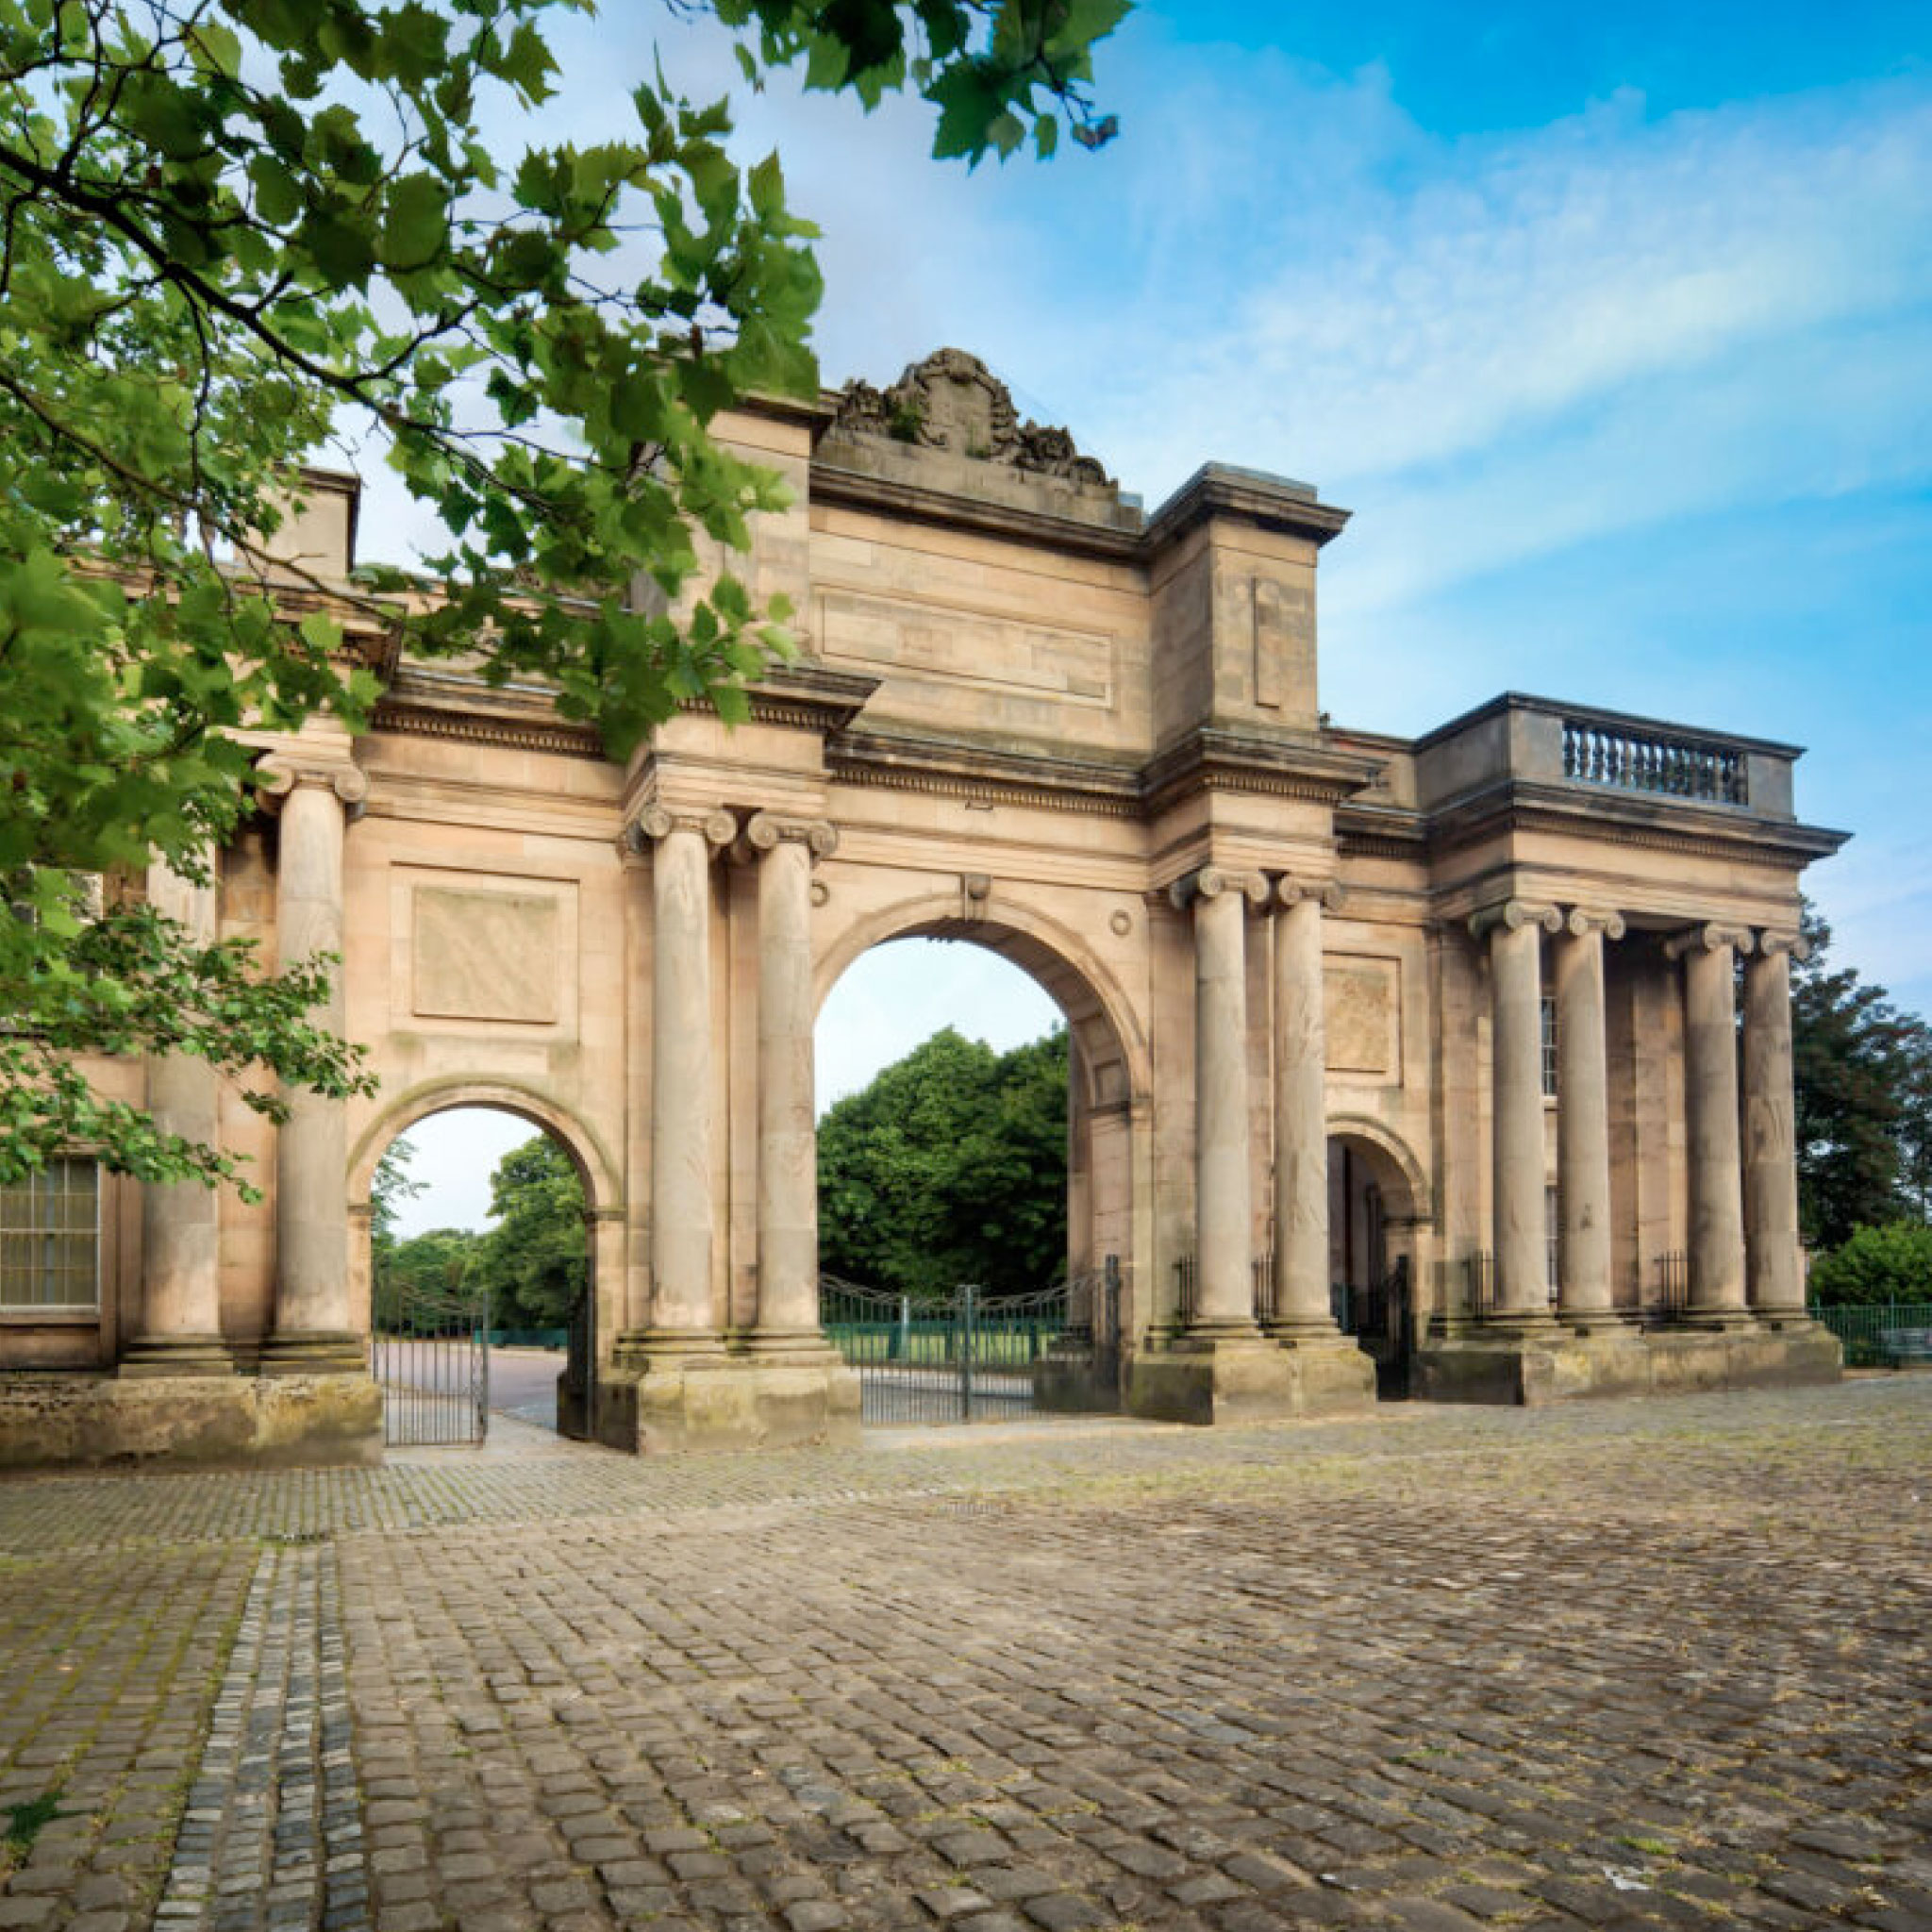 The arch seen from the outside, Birkenhead Park